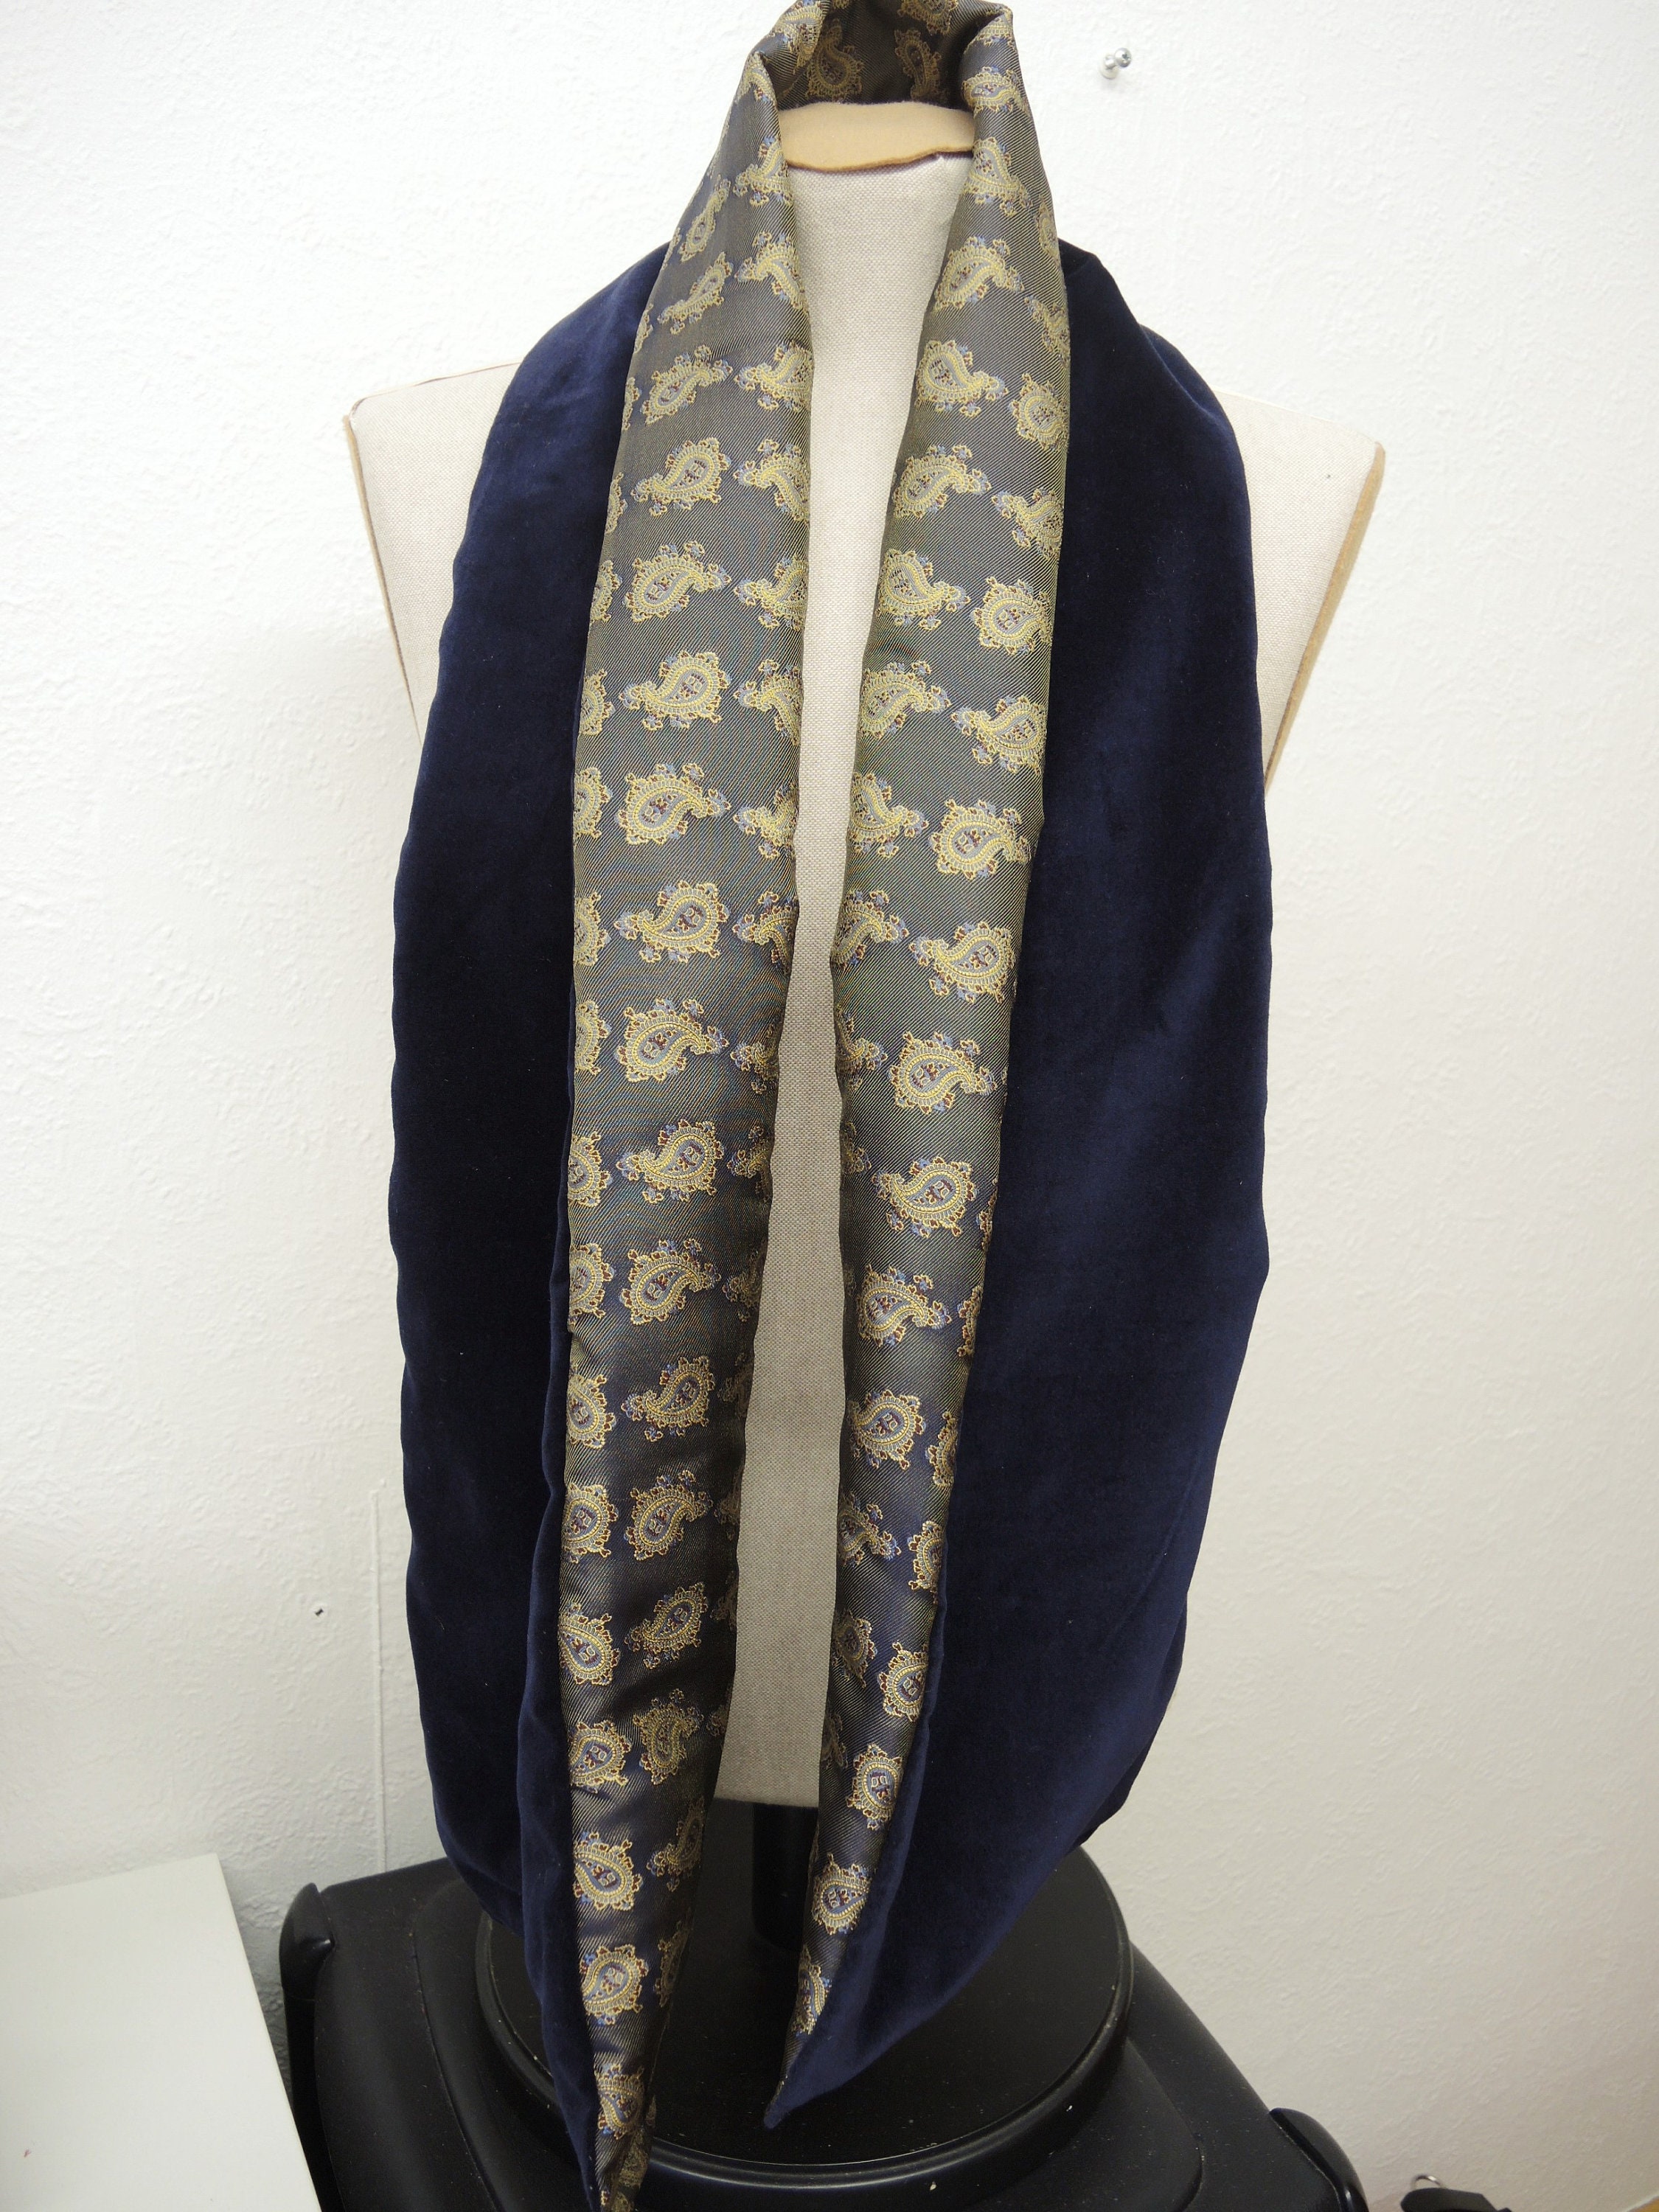 Navy Blue/Gold Paisley Scarf Brocade & Velvet - Cotton Velvet Silk Brocade Vanners Classic Design- Ready To Ship Free To UK and Europe